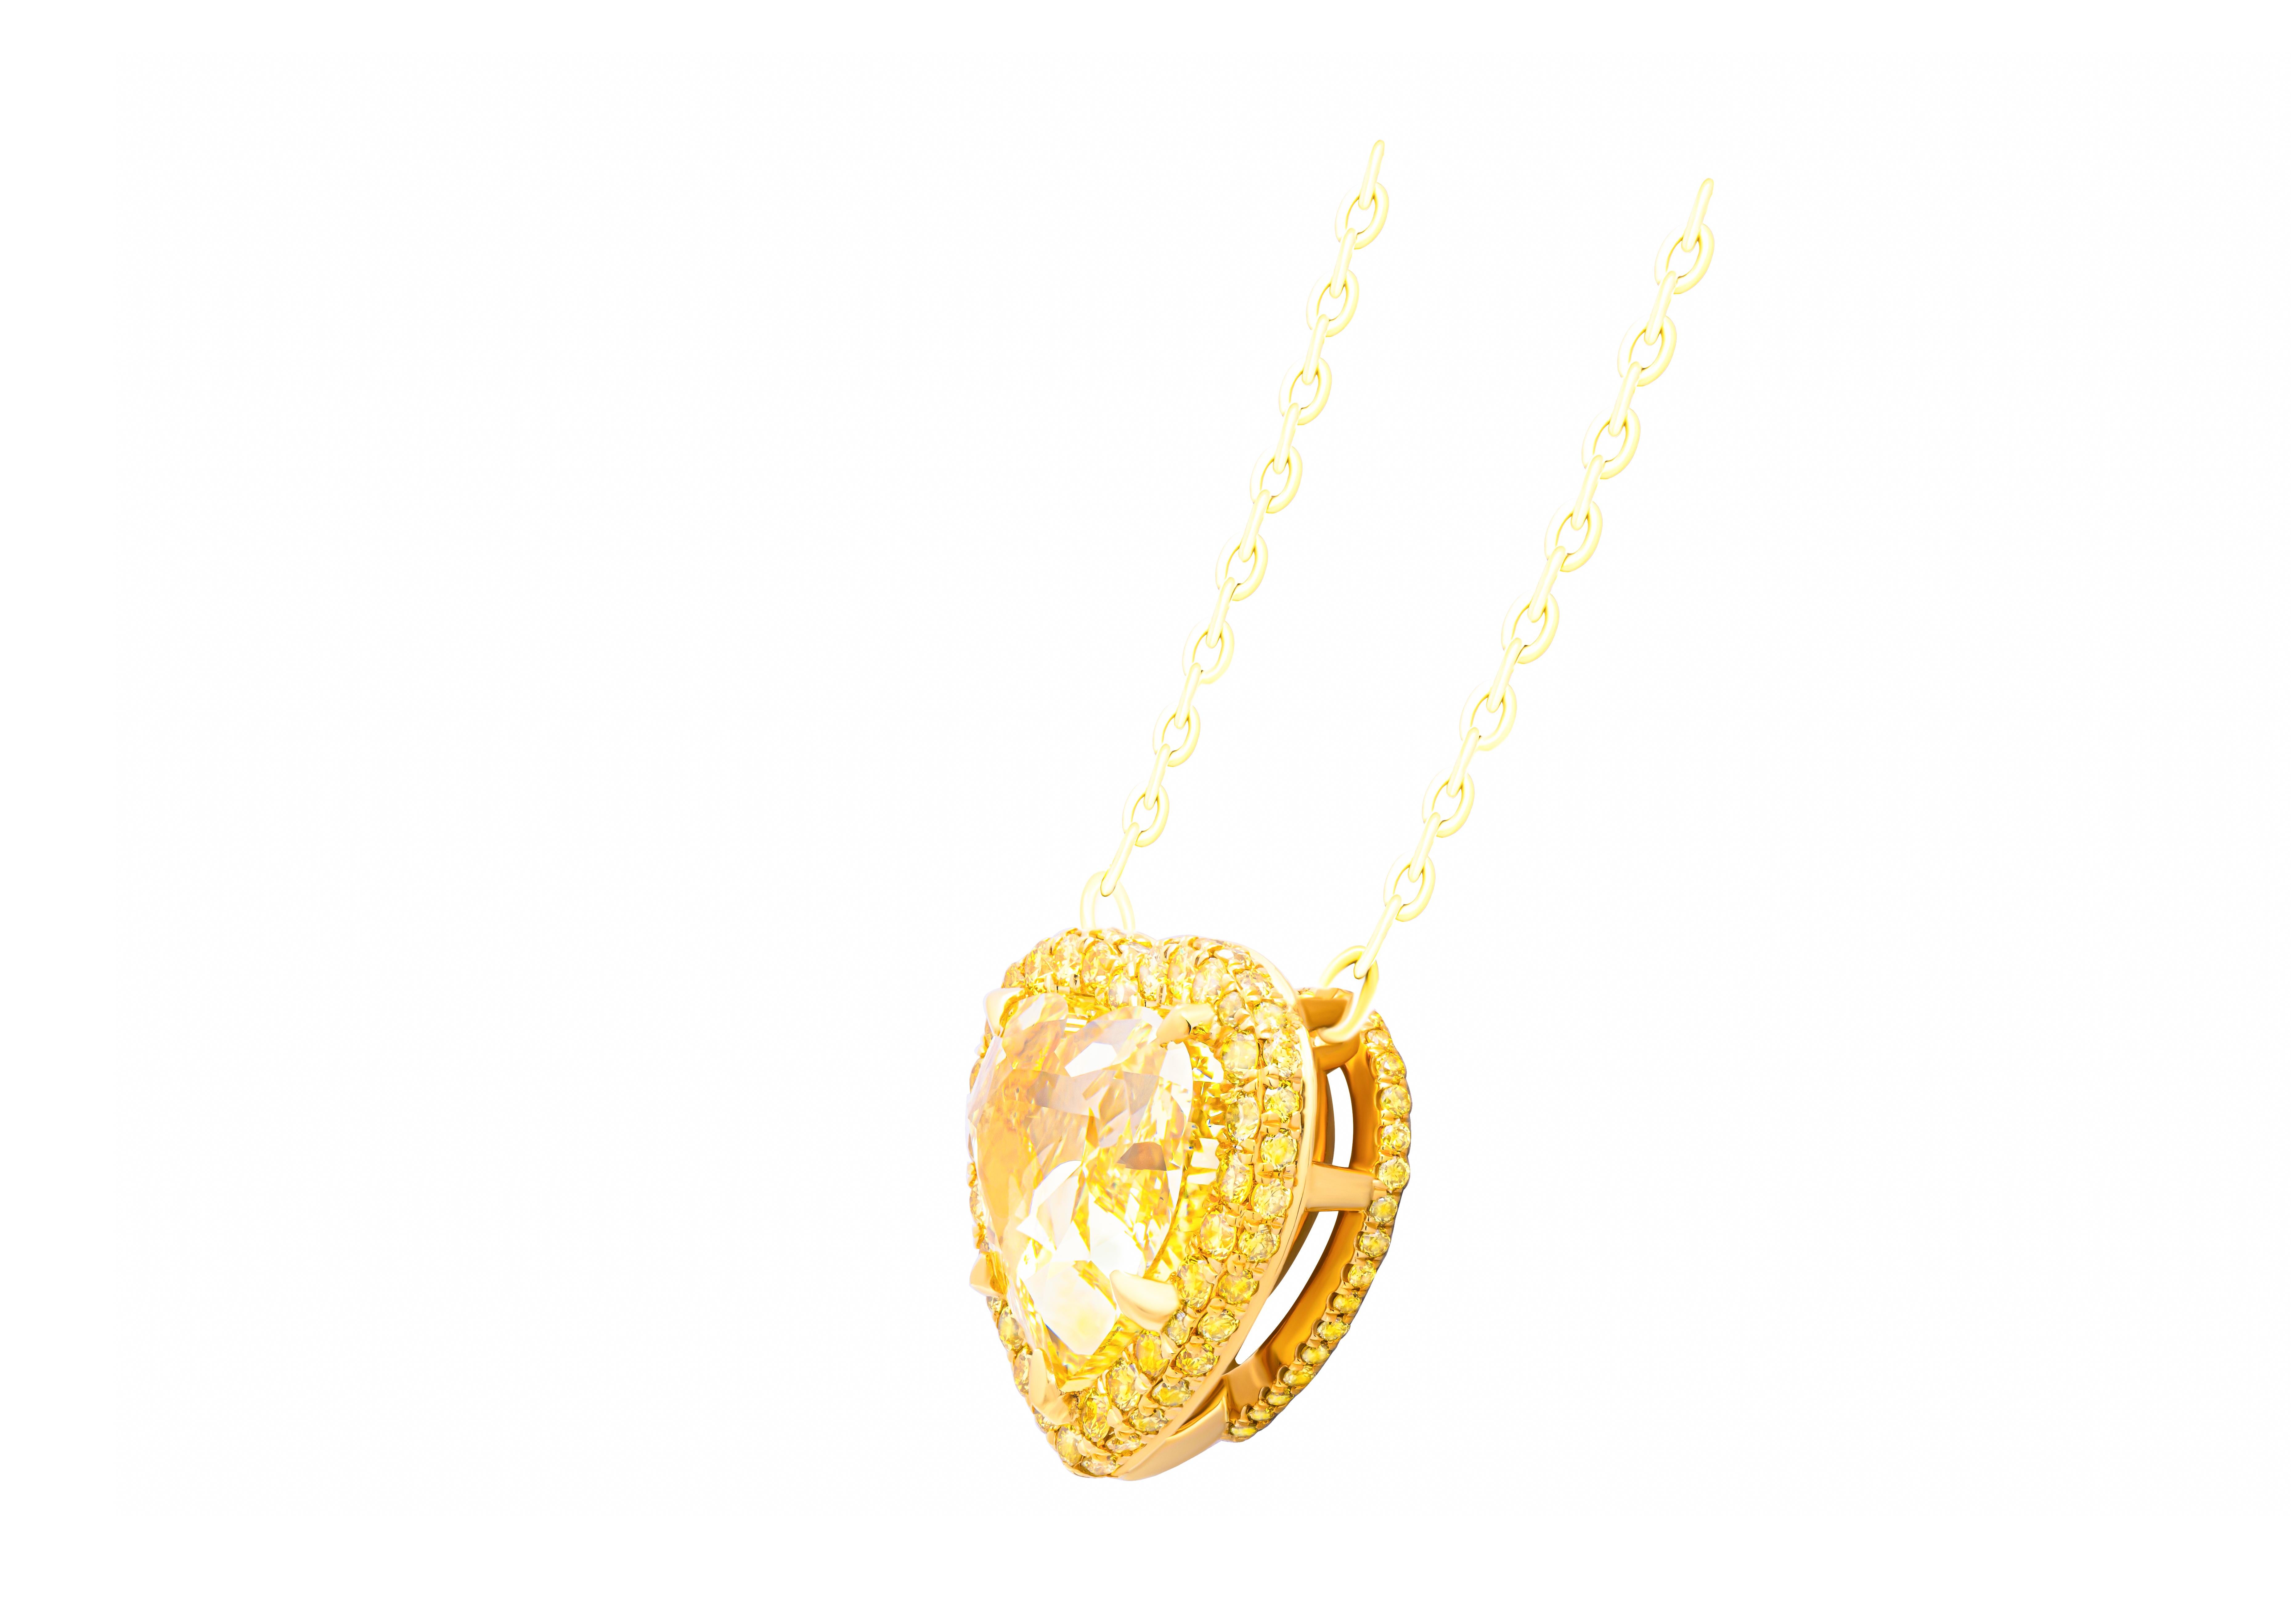 Introducing our exquisite Heart Shape pendant crafted in lustrous 18K Yellow Gold, featuring a stunning centerpiece - a dazzling 6.03 carat Fancy Intense Yellow Heart Shape diamond certified by GIA with the identification number GIA#2457985985. This